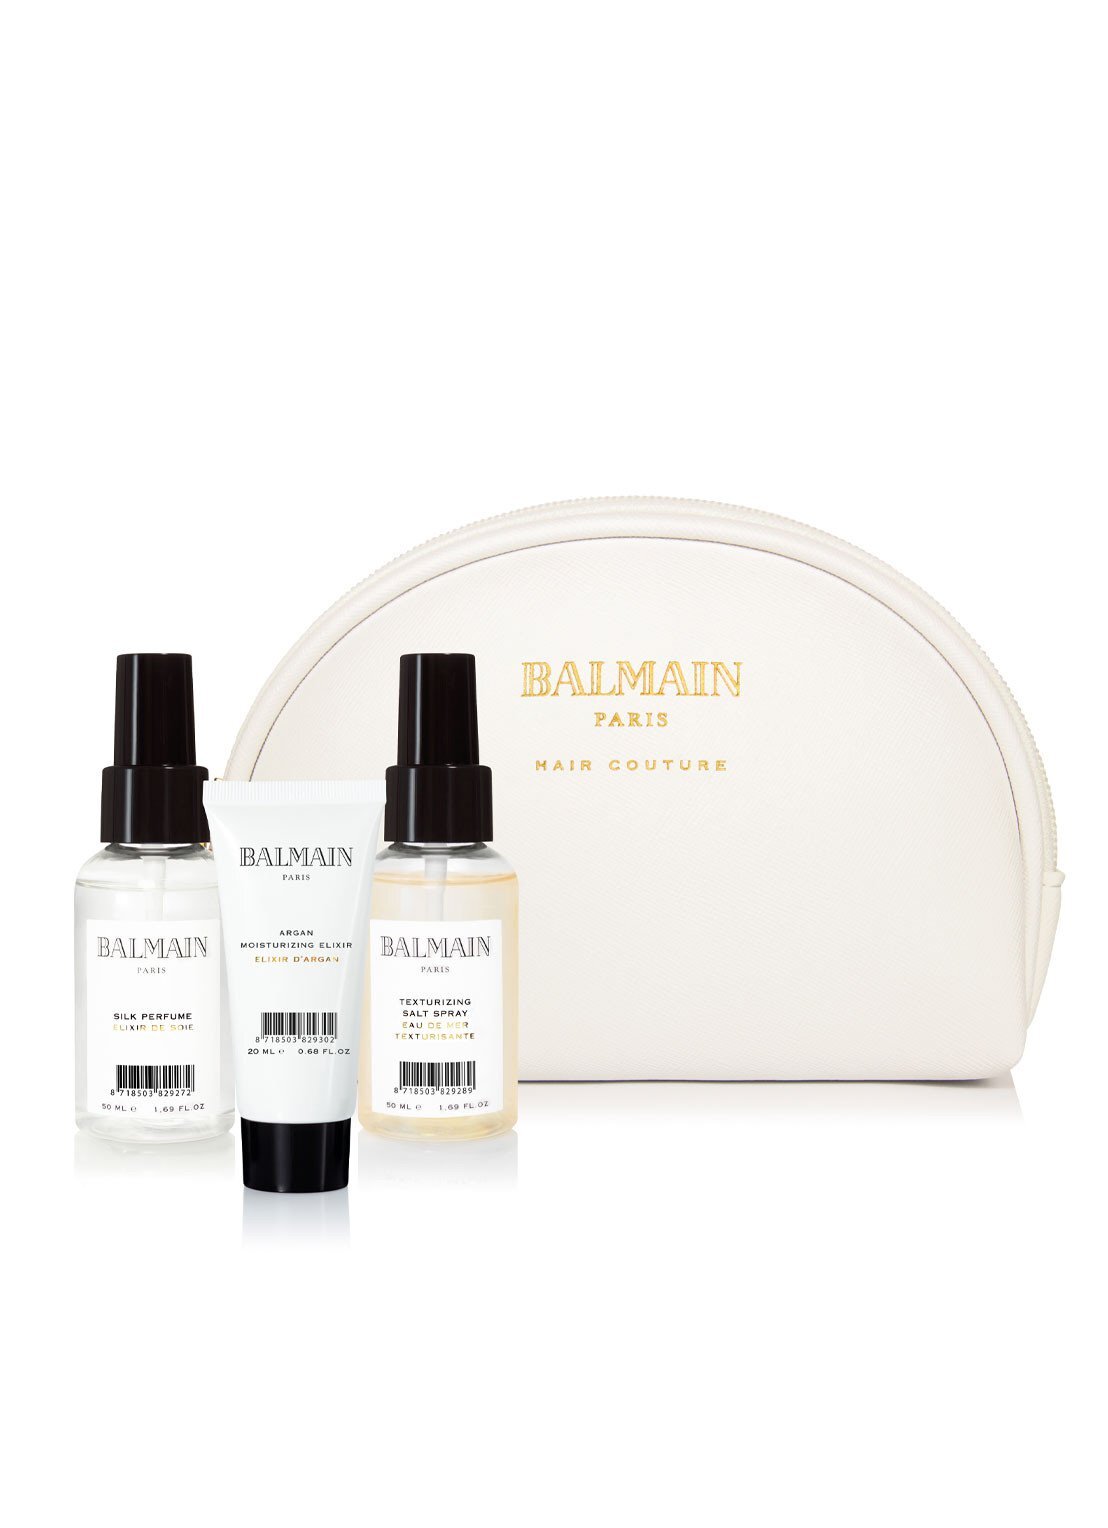 Balmain Paris Hair Couture Cosmetic Bag Styling Essentials - travel size